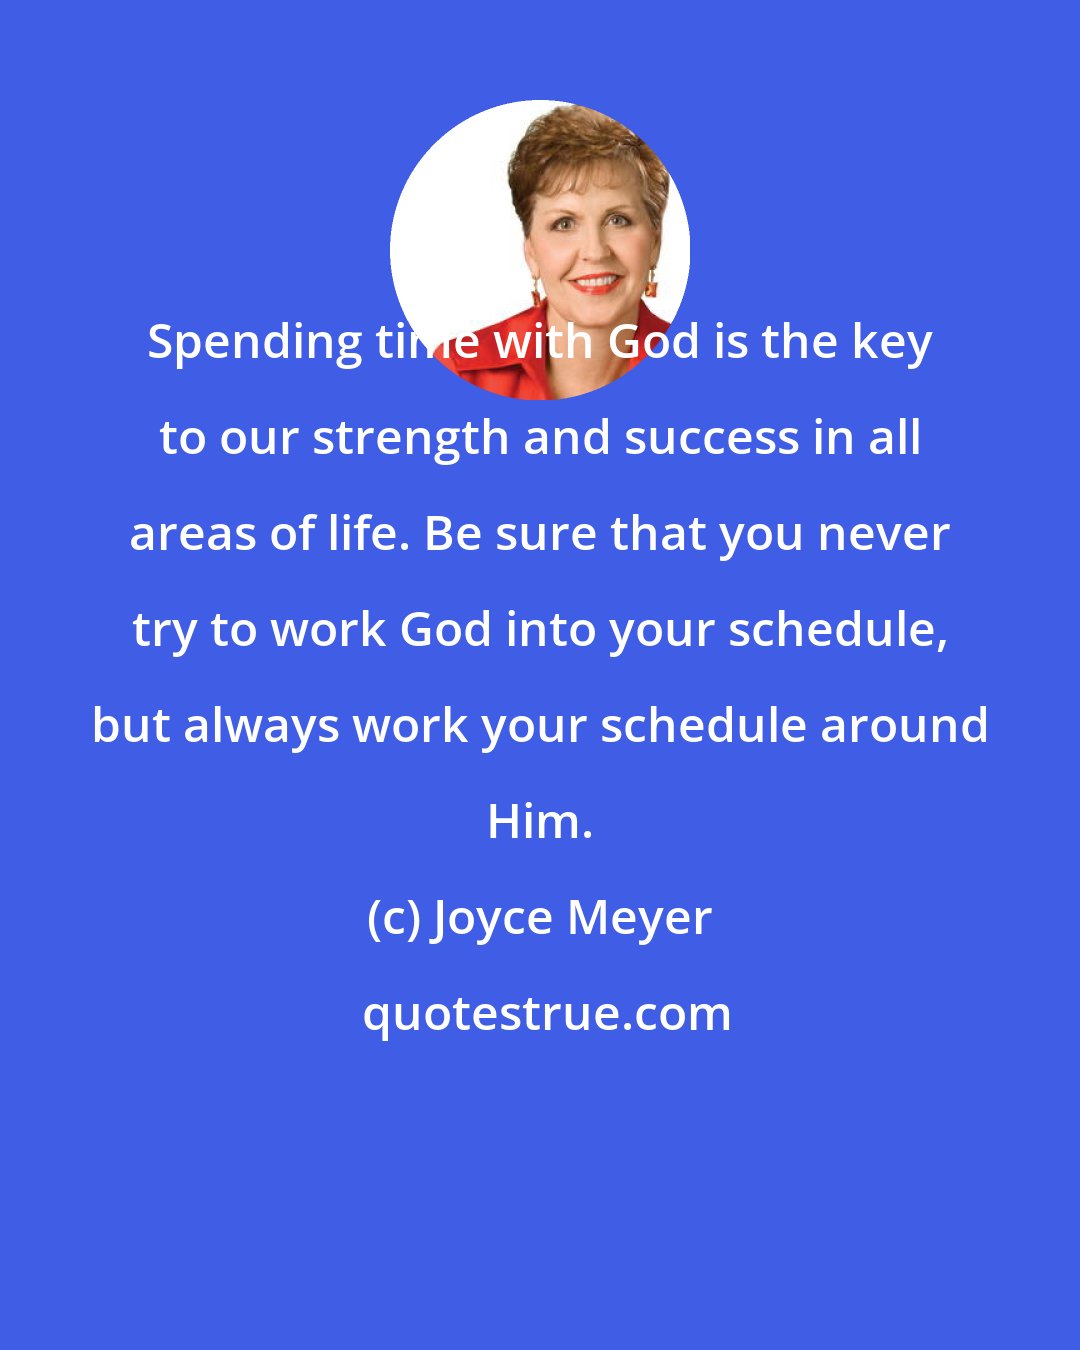 Joyce Meyer: Spending time with God is the key to our strength and success in all areas of life. Be sure that you never try to work God into your schedule, but always work your schedule around Him.